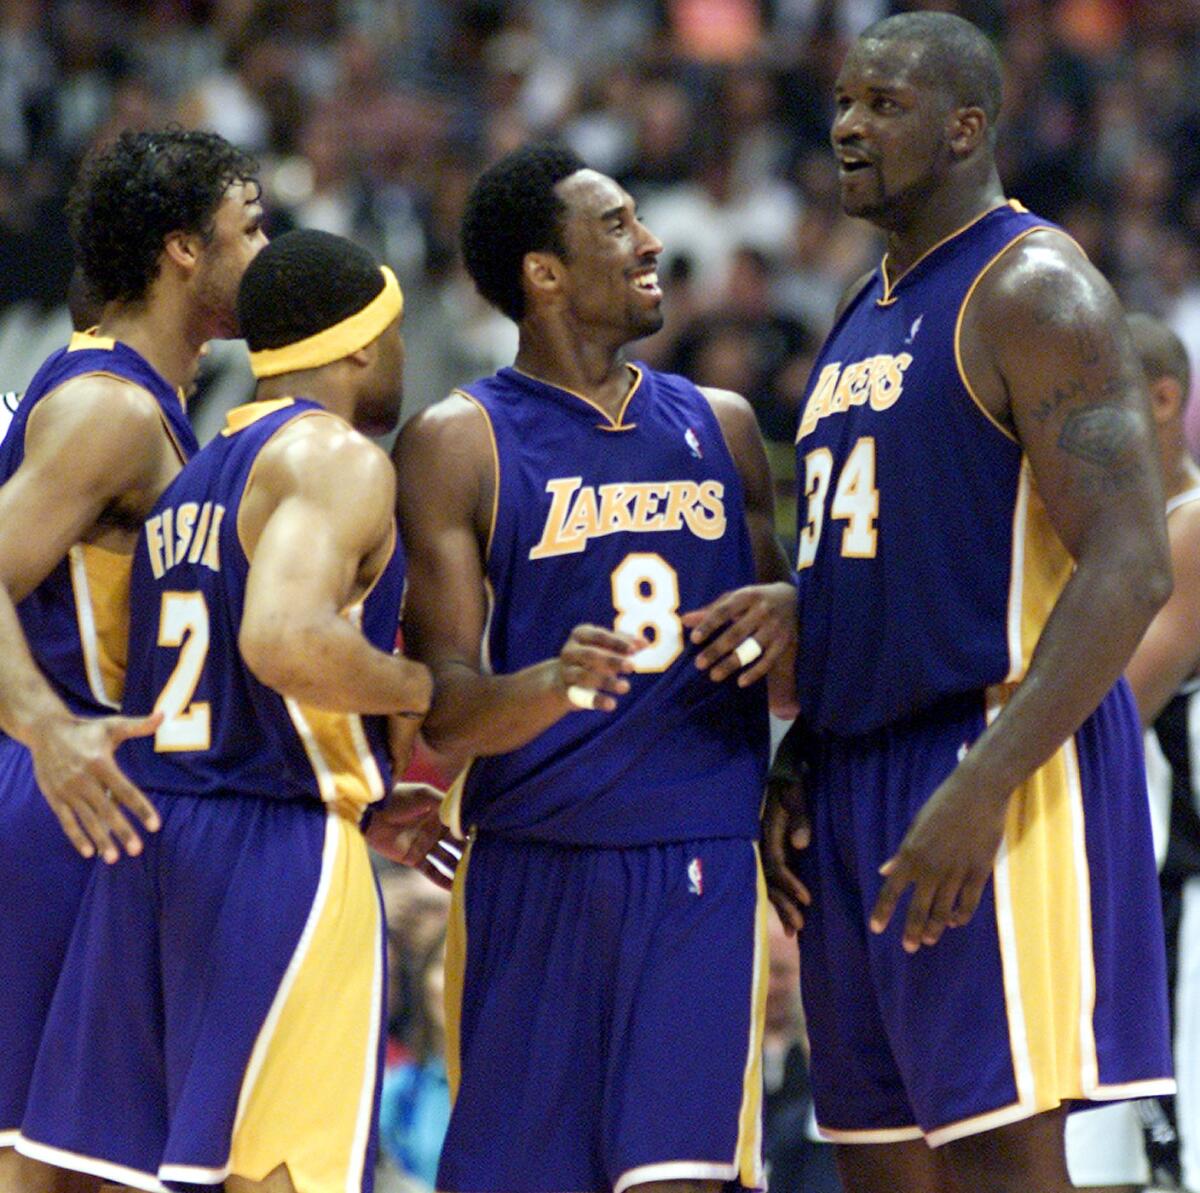 Kobe Bryant is congratulated by teammates Shaquille O'Neal, Derek Fisher and Rick Fox  after drawing a foul in a 104-90 victory over the Spurs.